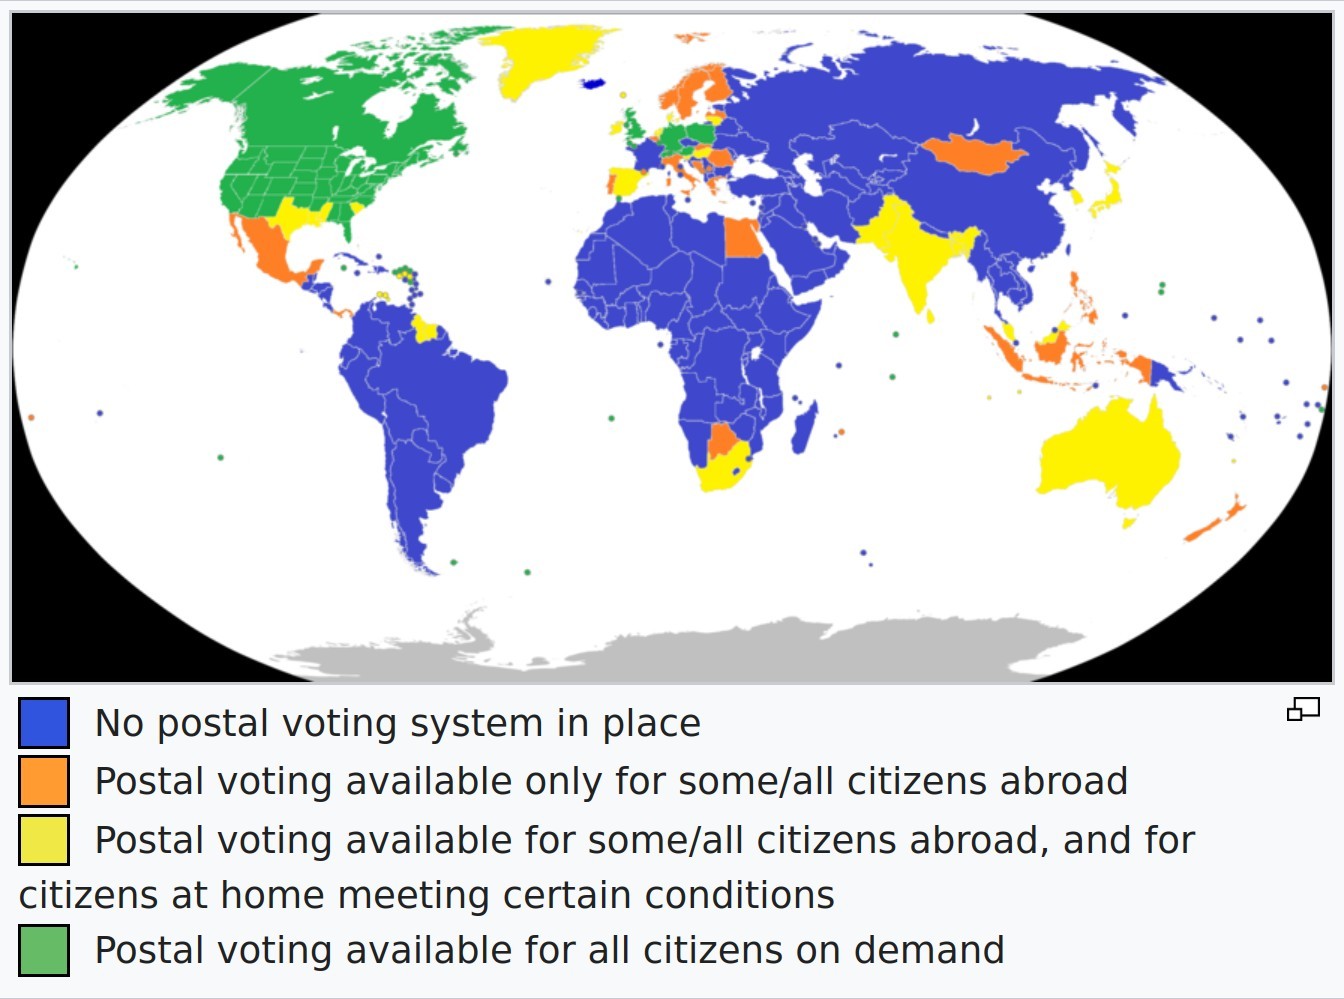 Most countries don't allow postal voting, or only allow it under special circumstances.